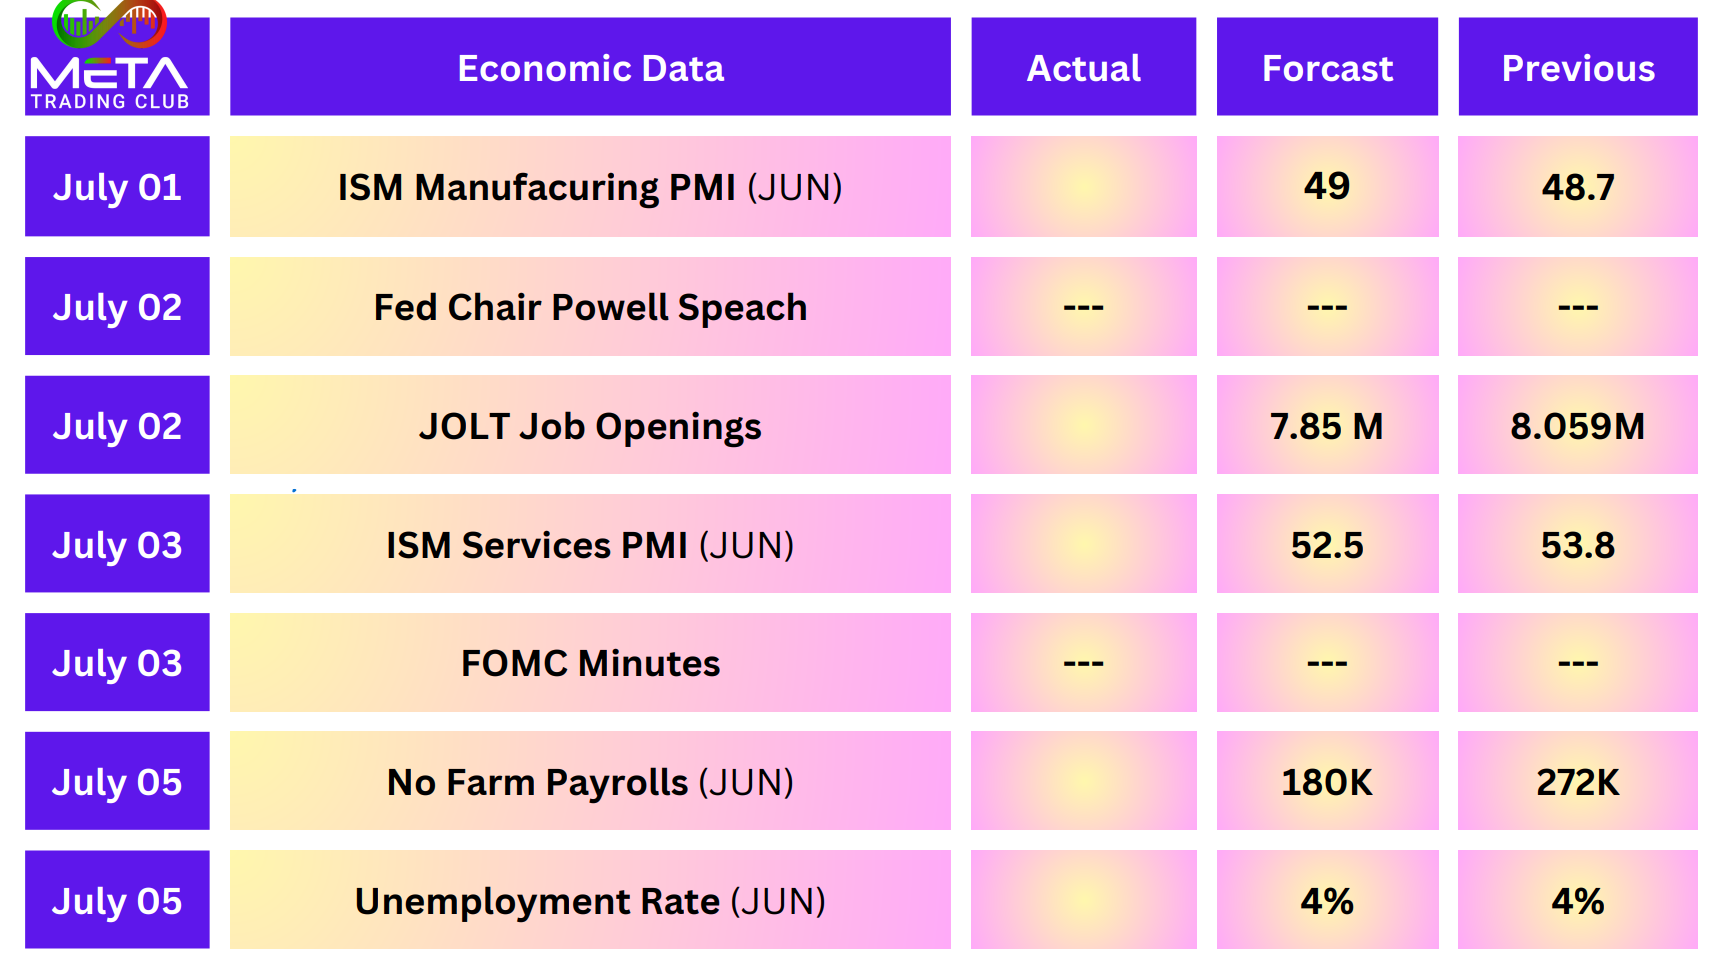 July first week economy forecasts